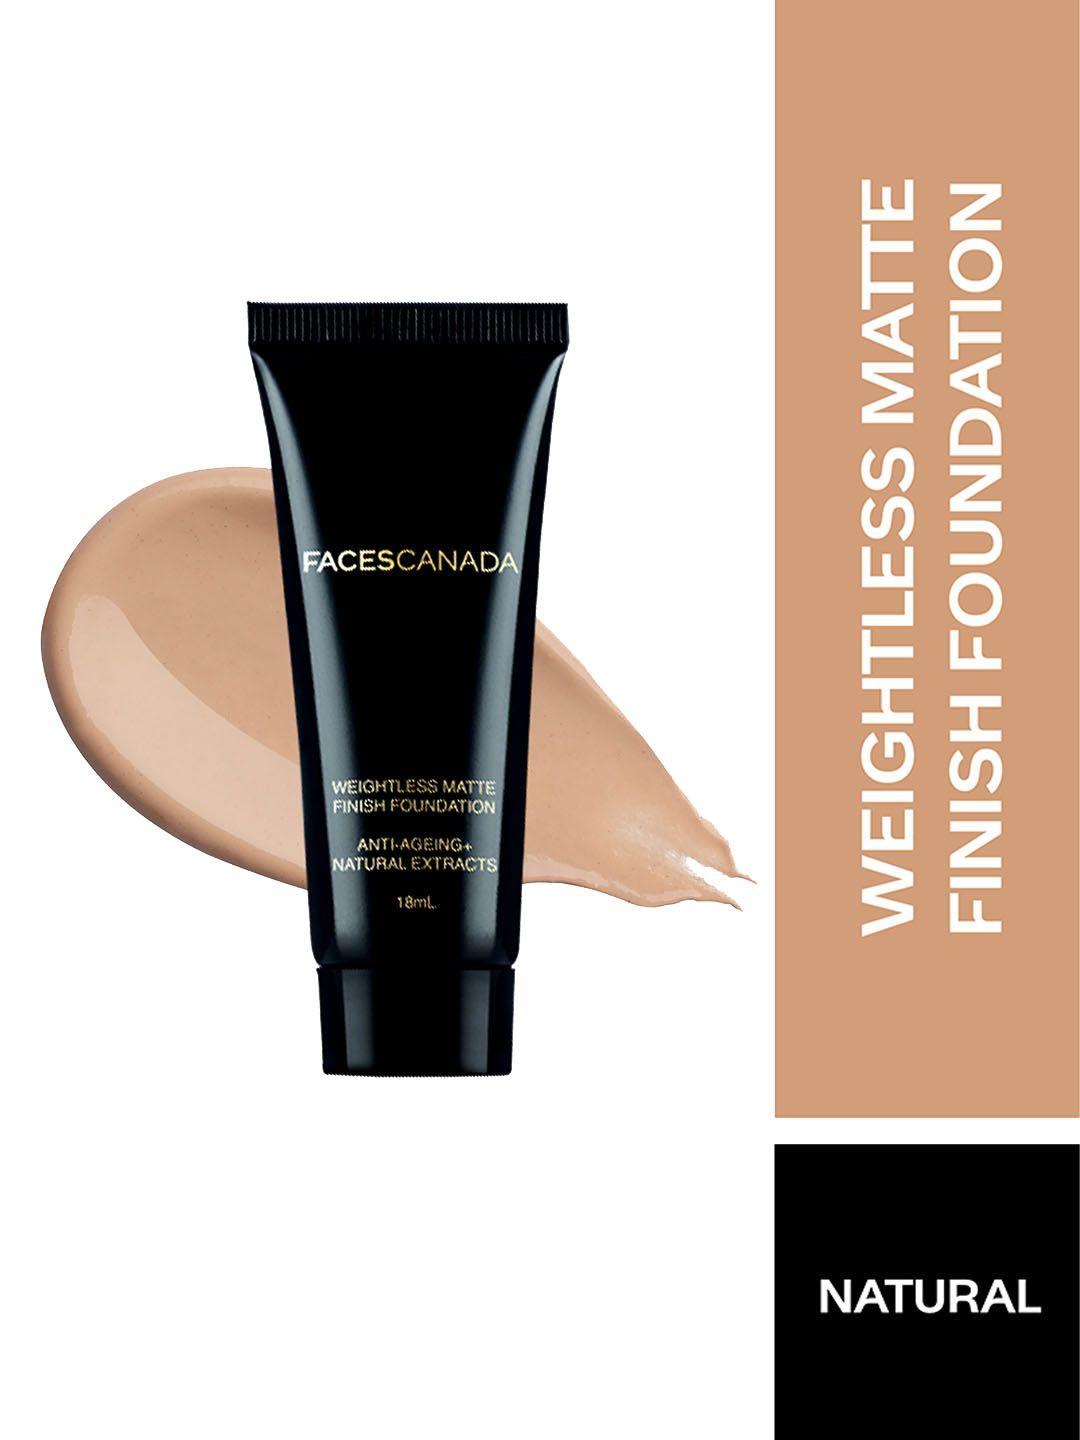 faces canada weightless matte foundation with grape extracts & shea butter 18ml - natural 02